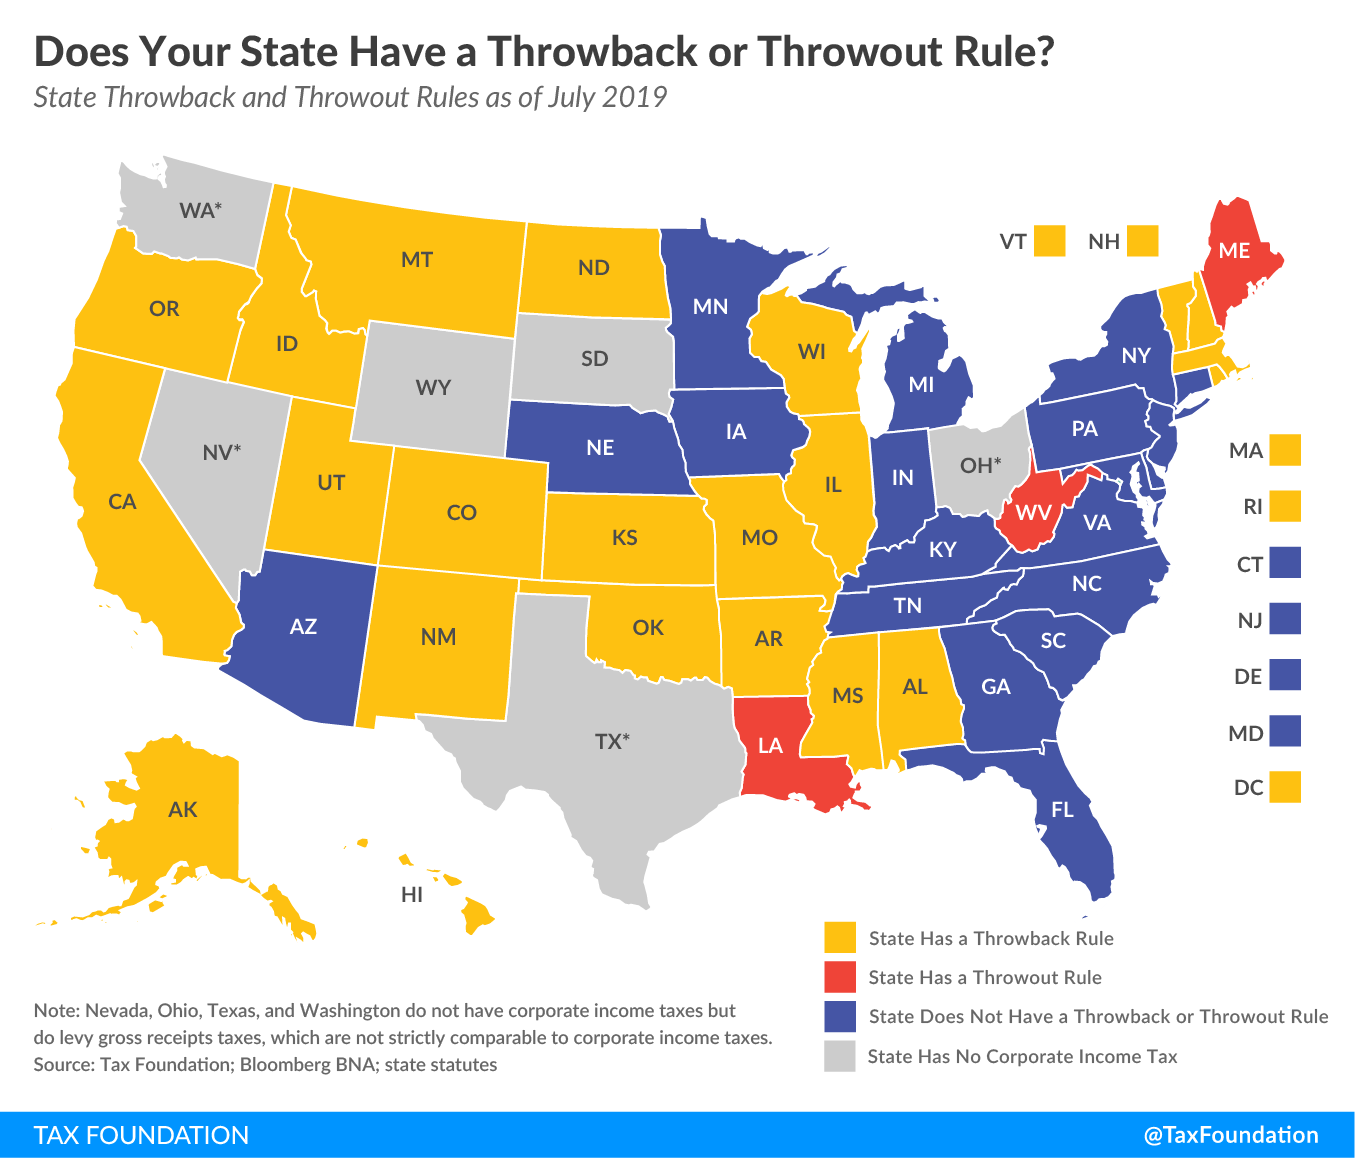 State throwback rules, state throwout rules, corporate taxation, economic nexus, double taxation on corporate income